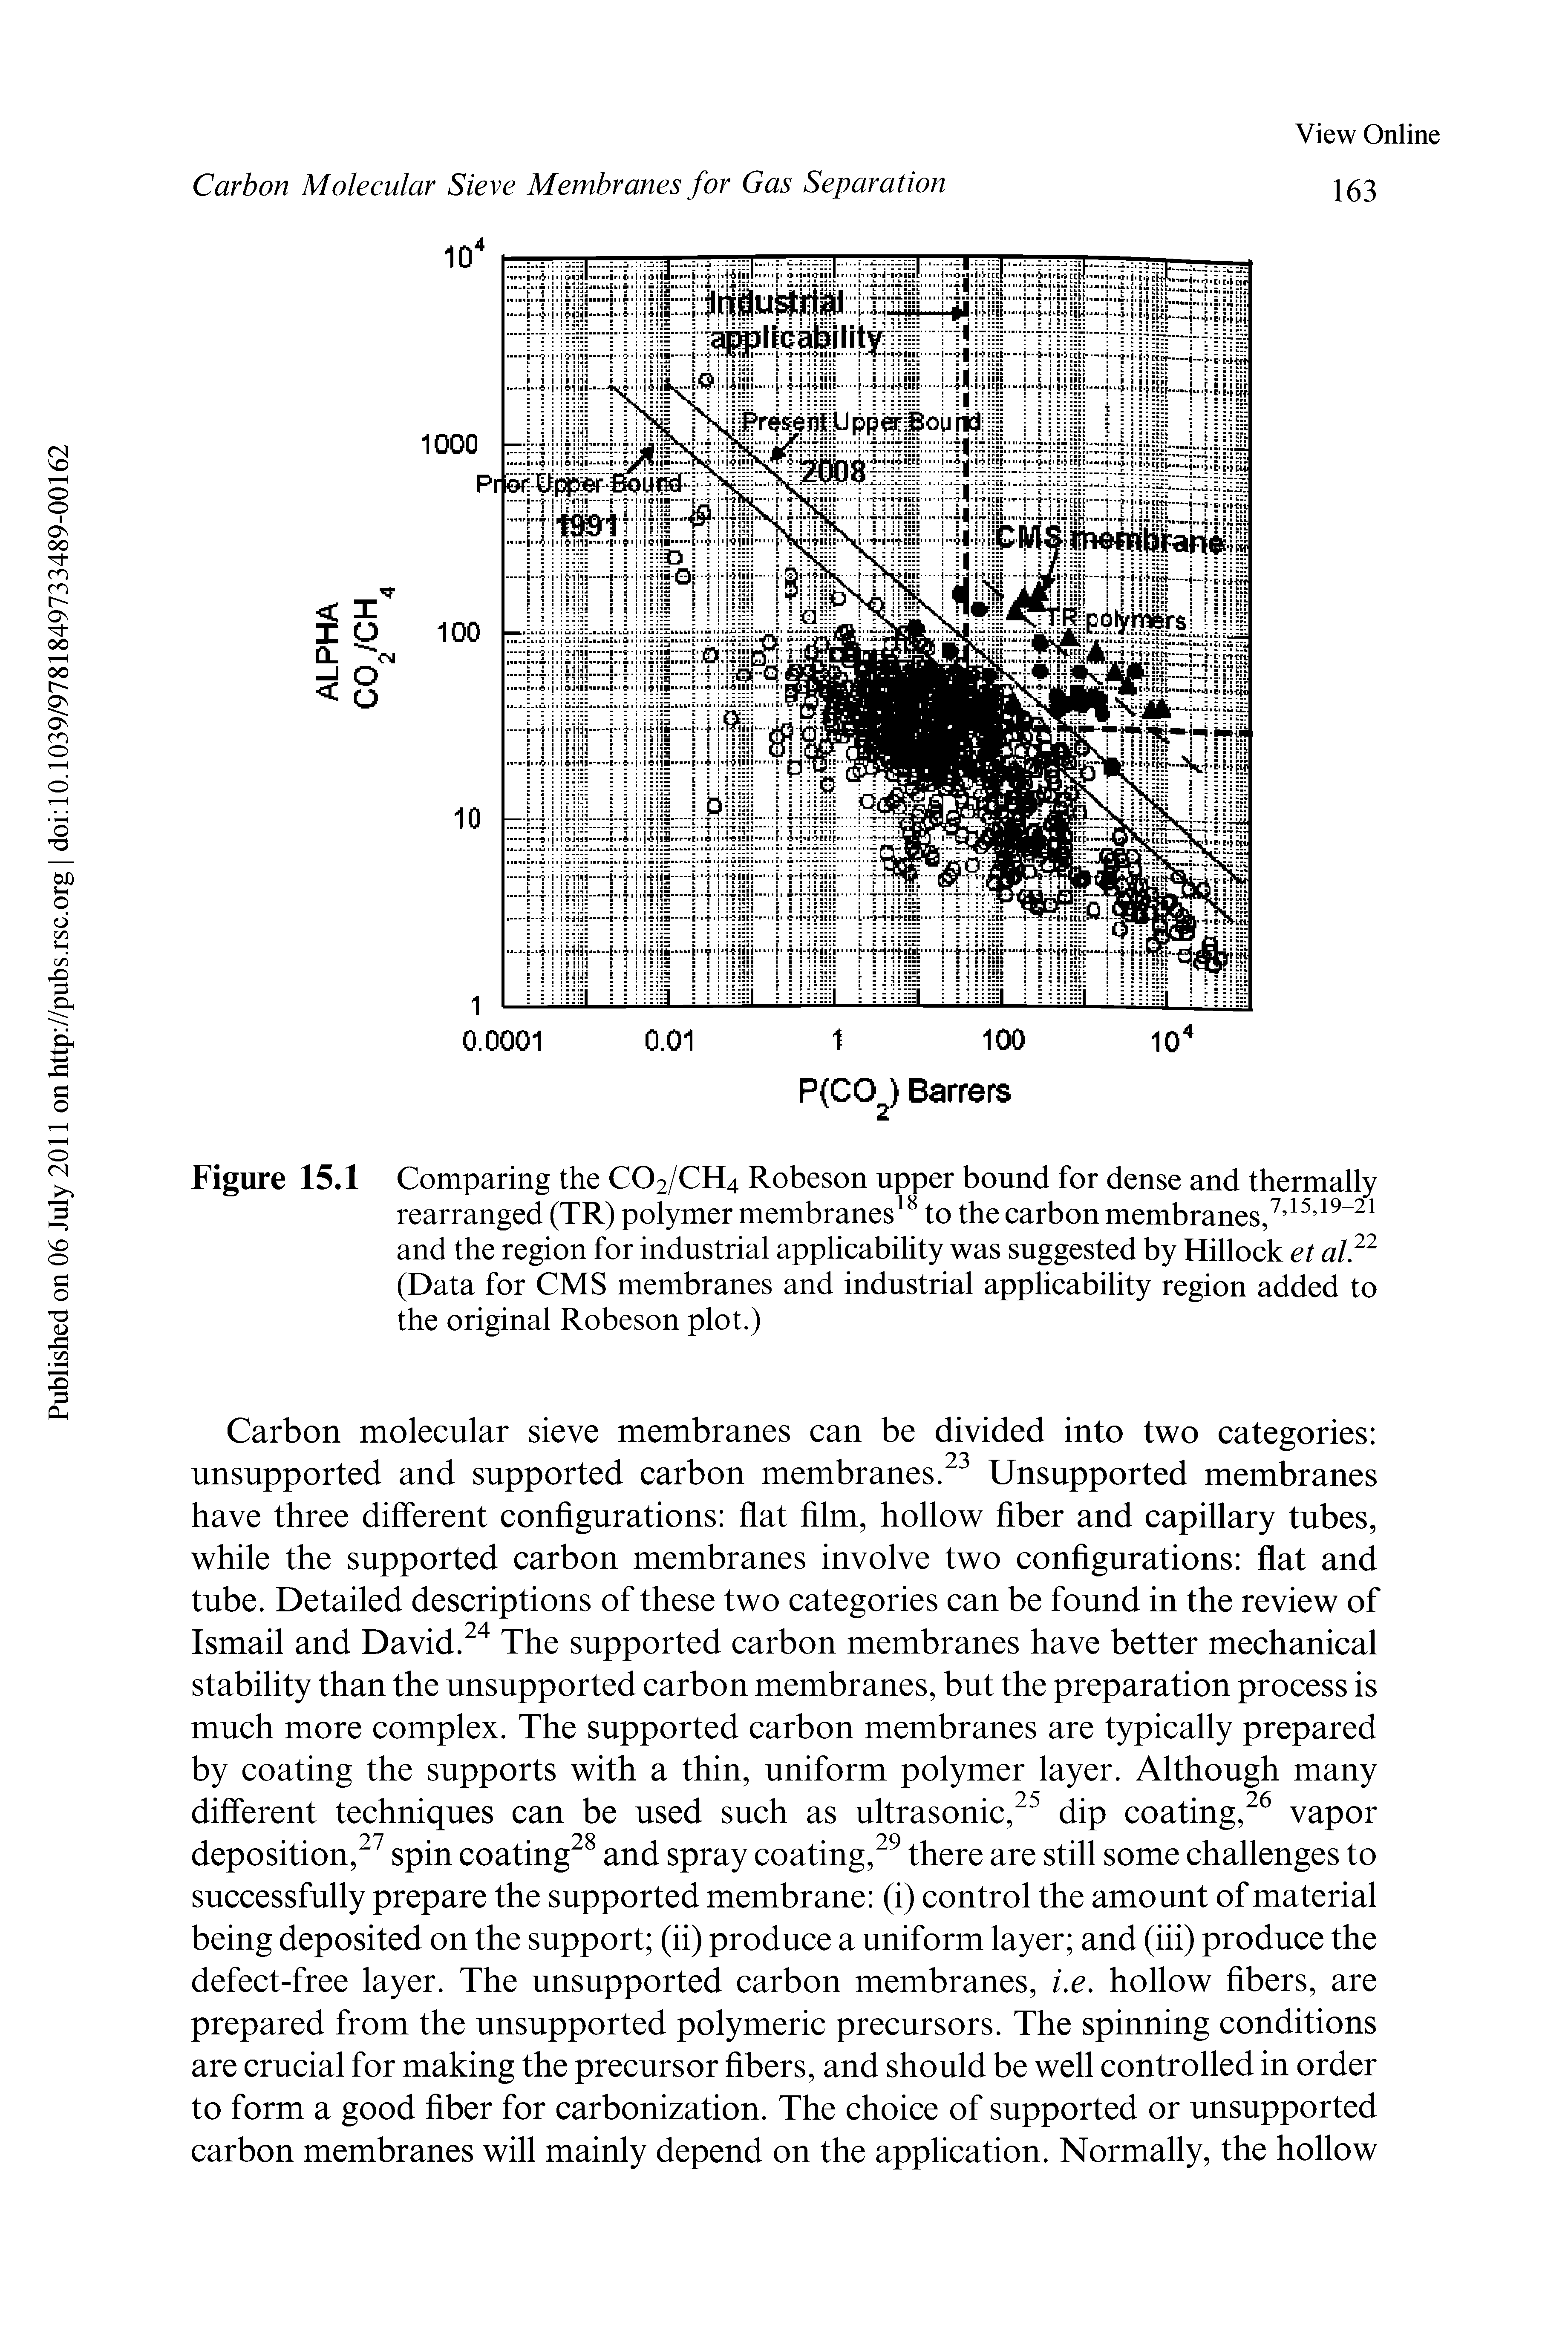 Figure 15.1 Comparing the CO2/CH4 Robeson upper bound for dense and thermally rearranged (TR) polymer membranes to the carbon membranes/ and the region for industrial applicability was suggested by Hillock et alf (Data for CMS membranes and industrial applicability region added to the original Robeson plot.)...